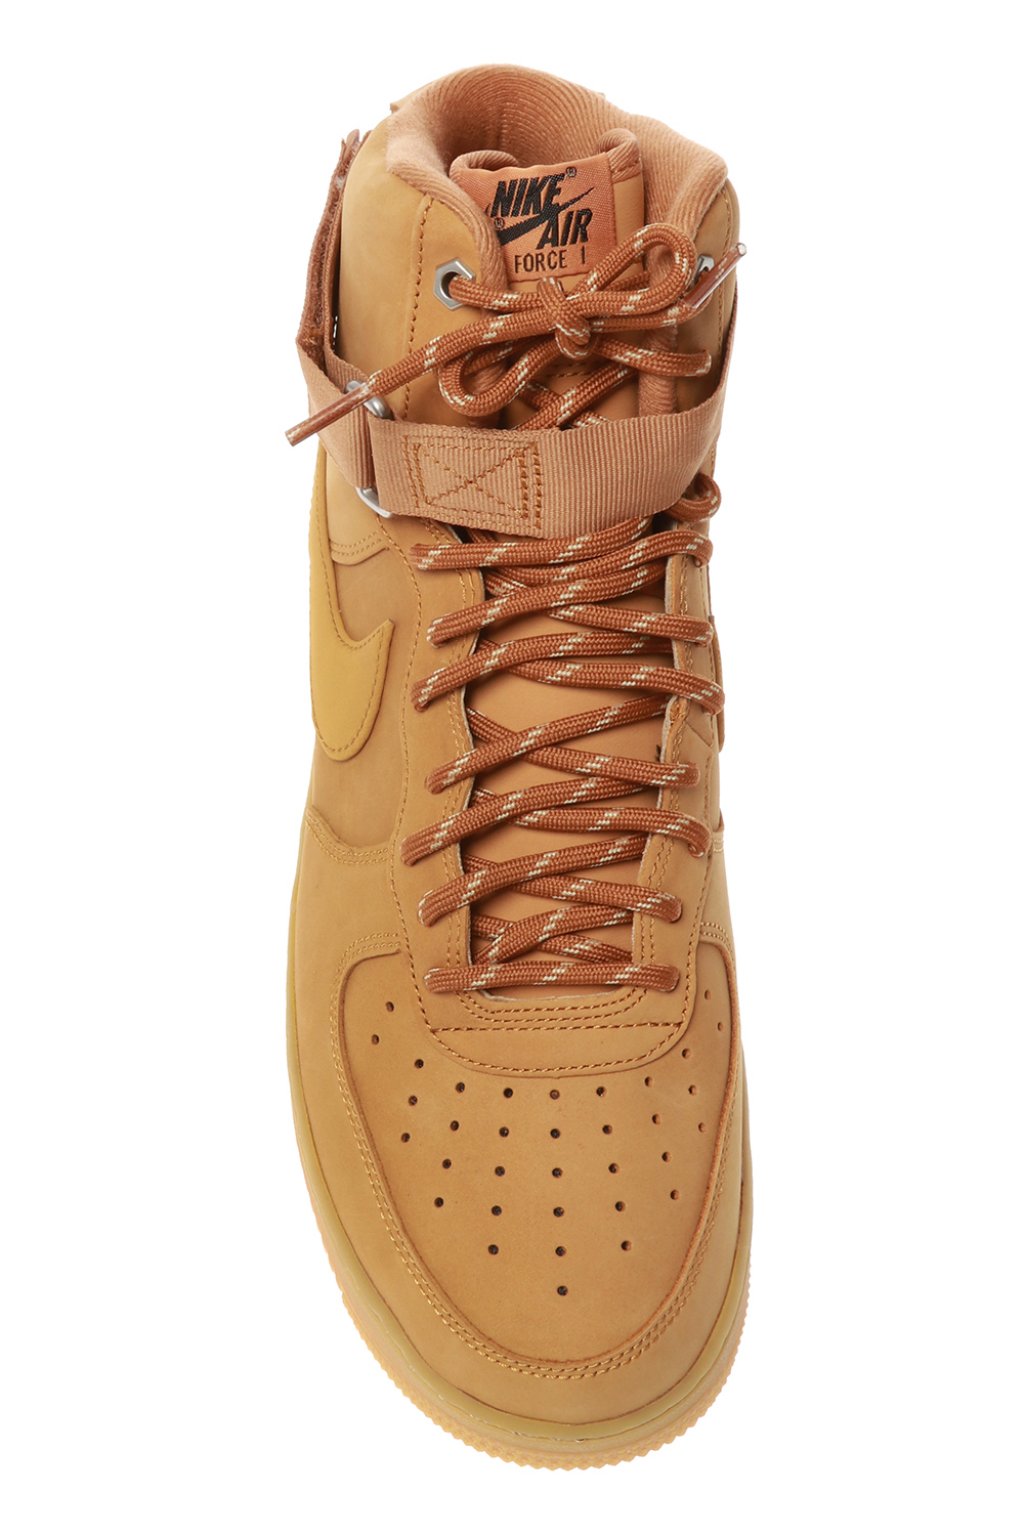 brown nike shoes air force